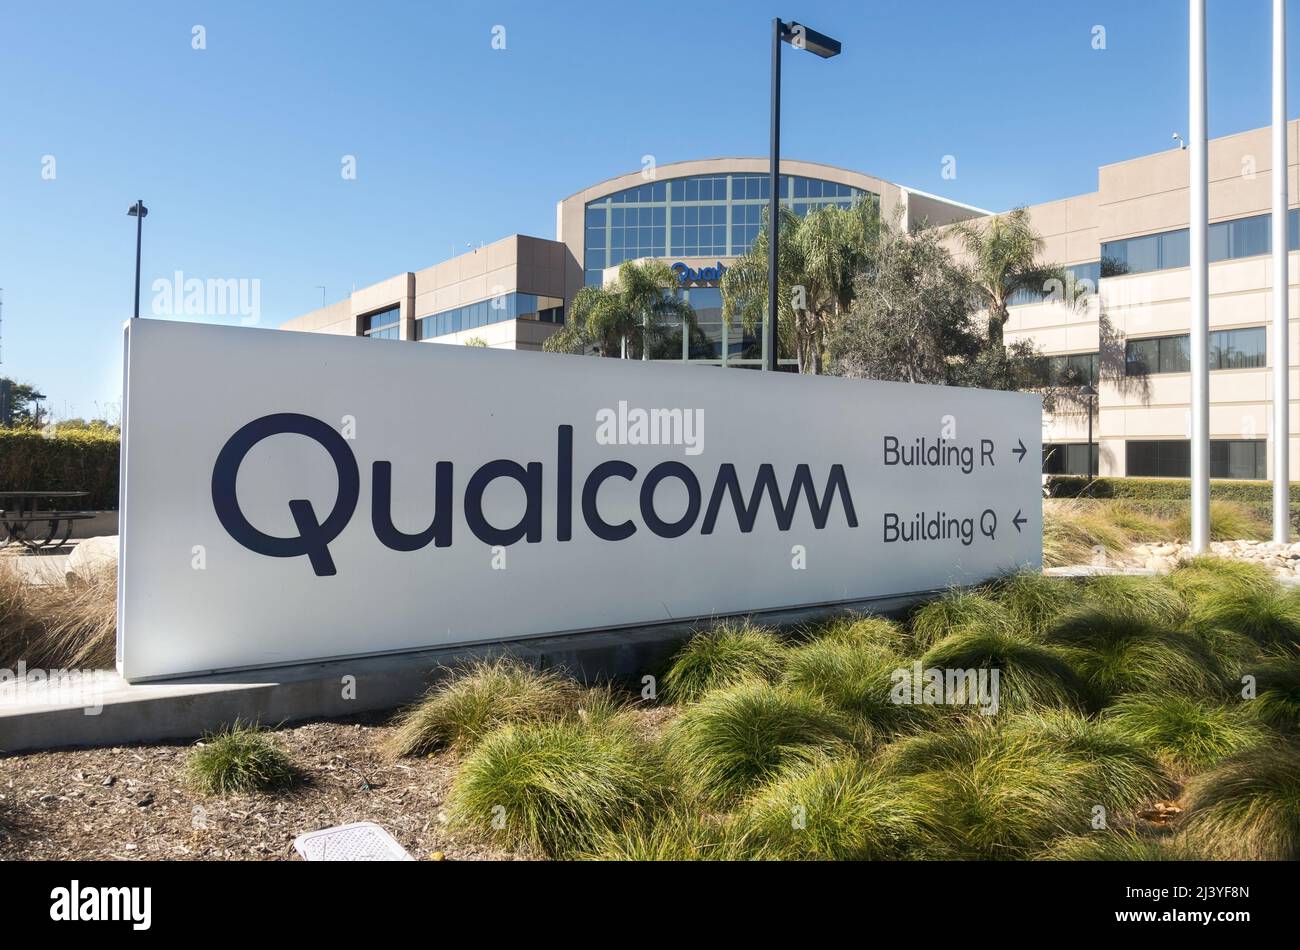 Qualcomm Incorporated Sorrento Valley Building Office Exterior. Qualcomm è US Wireless Industry Semiconductor Telecommunication multinazionale Foto Stock